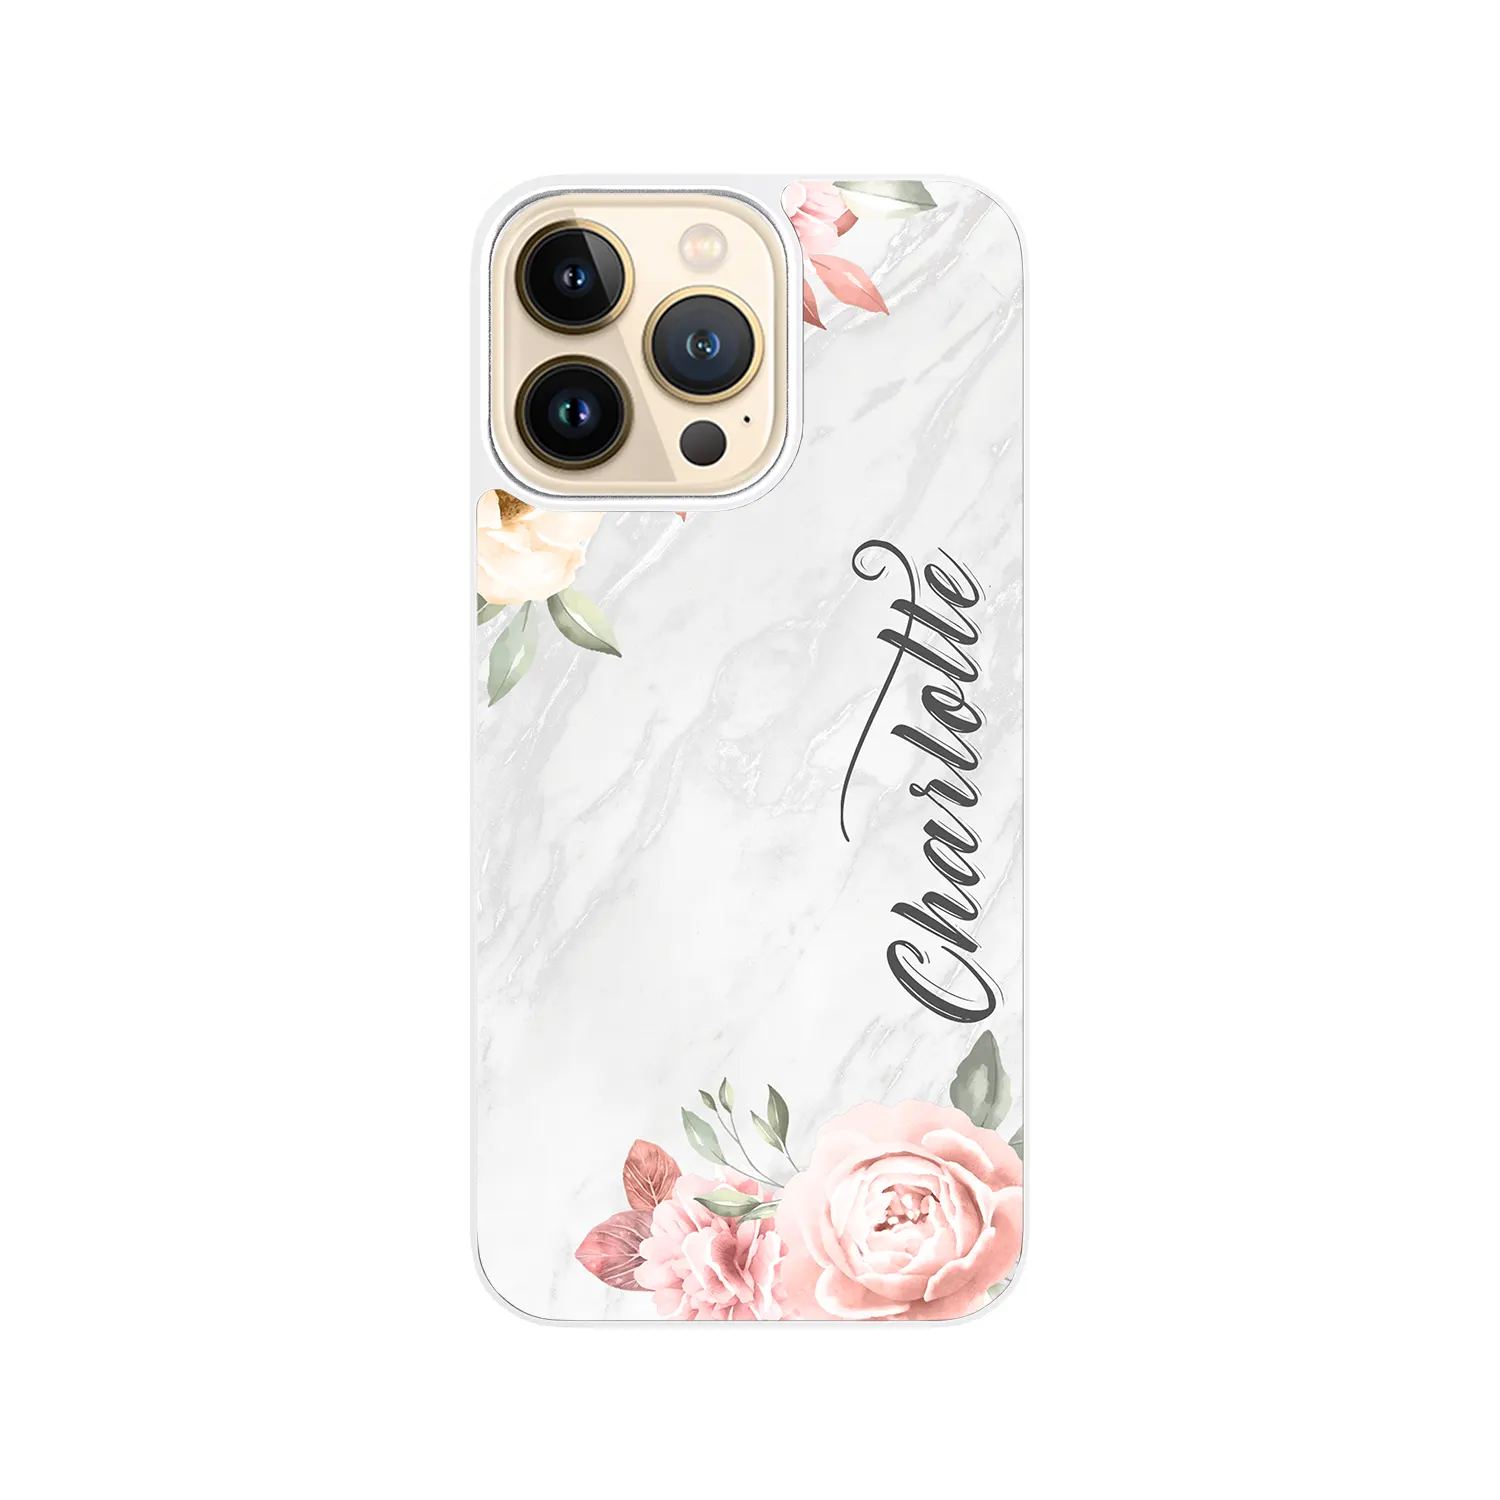 Summer Serene iPhone 12 Pro Max Cover